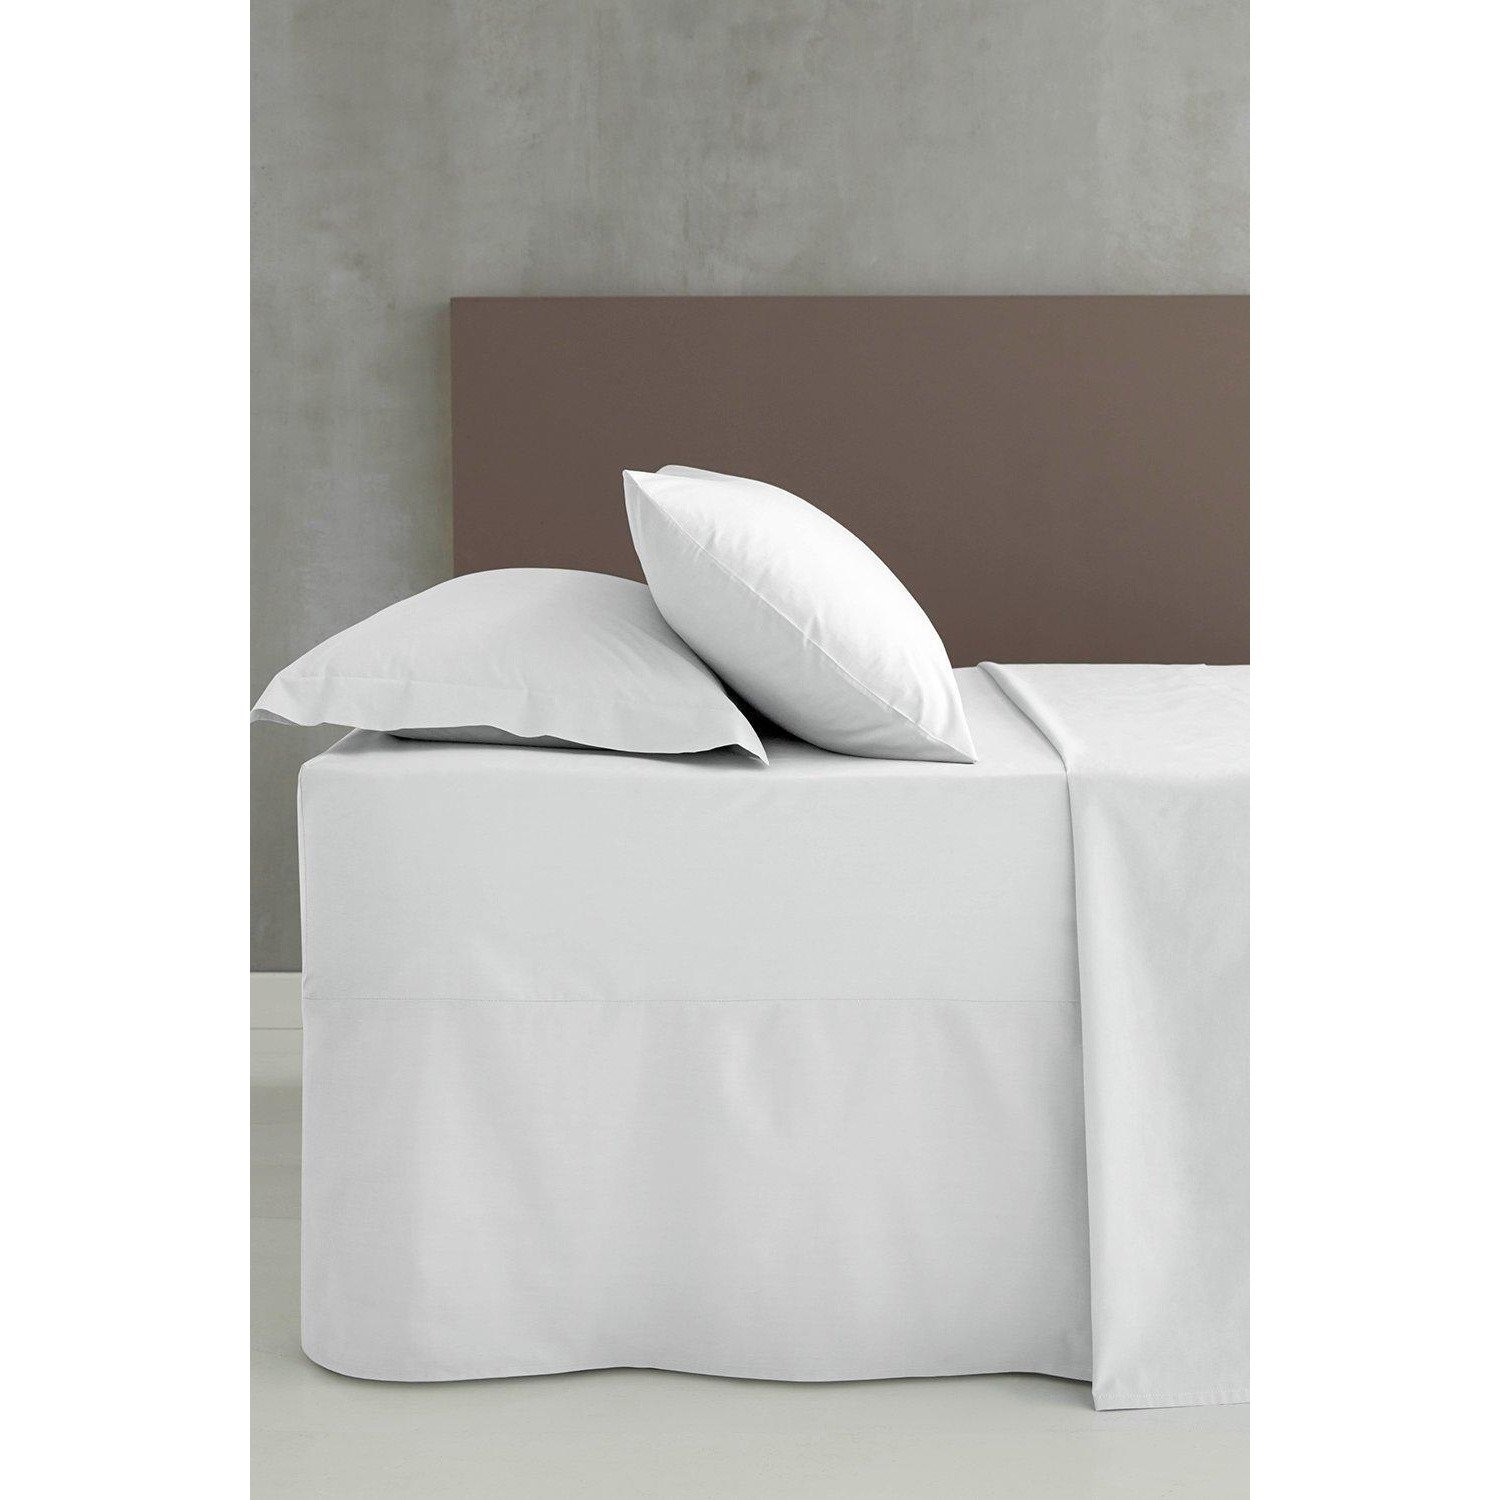 'Easy Iron Percale' Fitted Valance Sheet - image 1